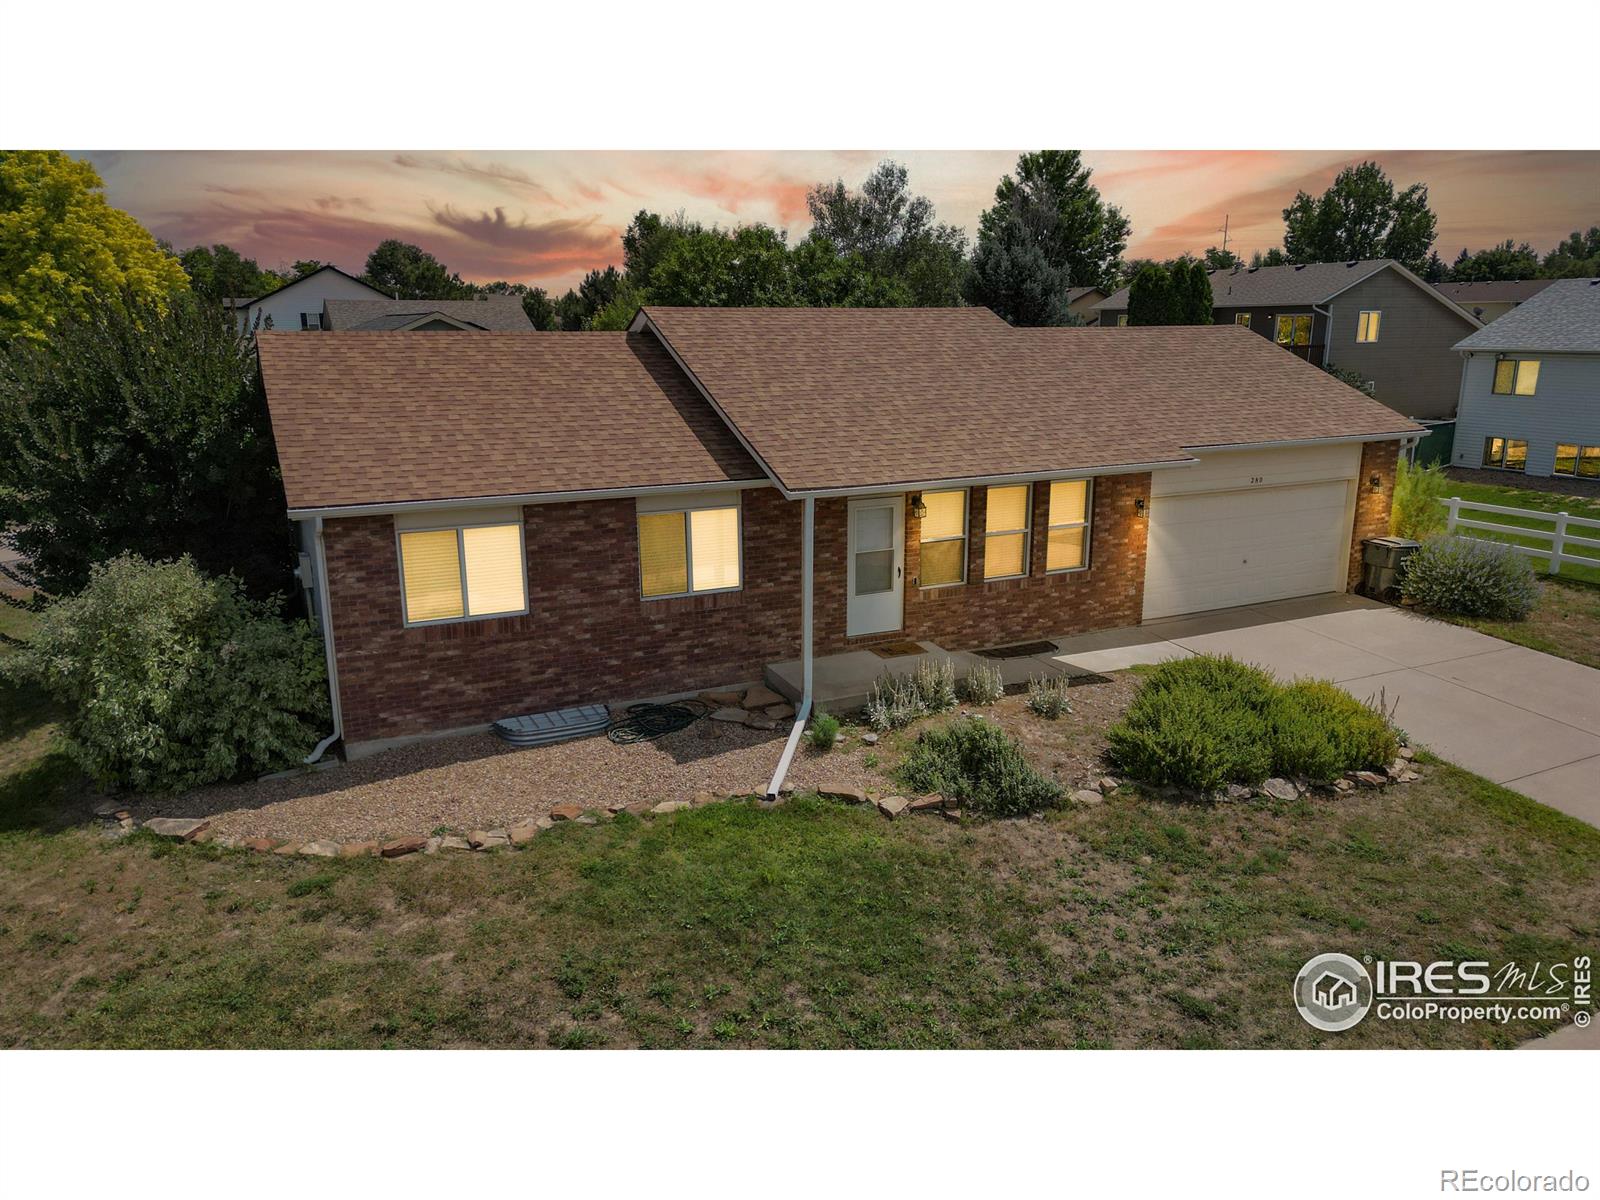 280  50th Avenue, greeley MLS: 123456789995169 Beds: 4 Baths: 3 Price: $415,000